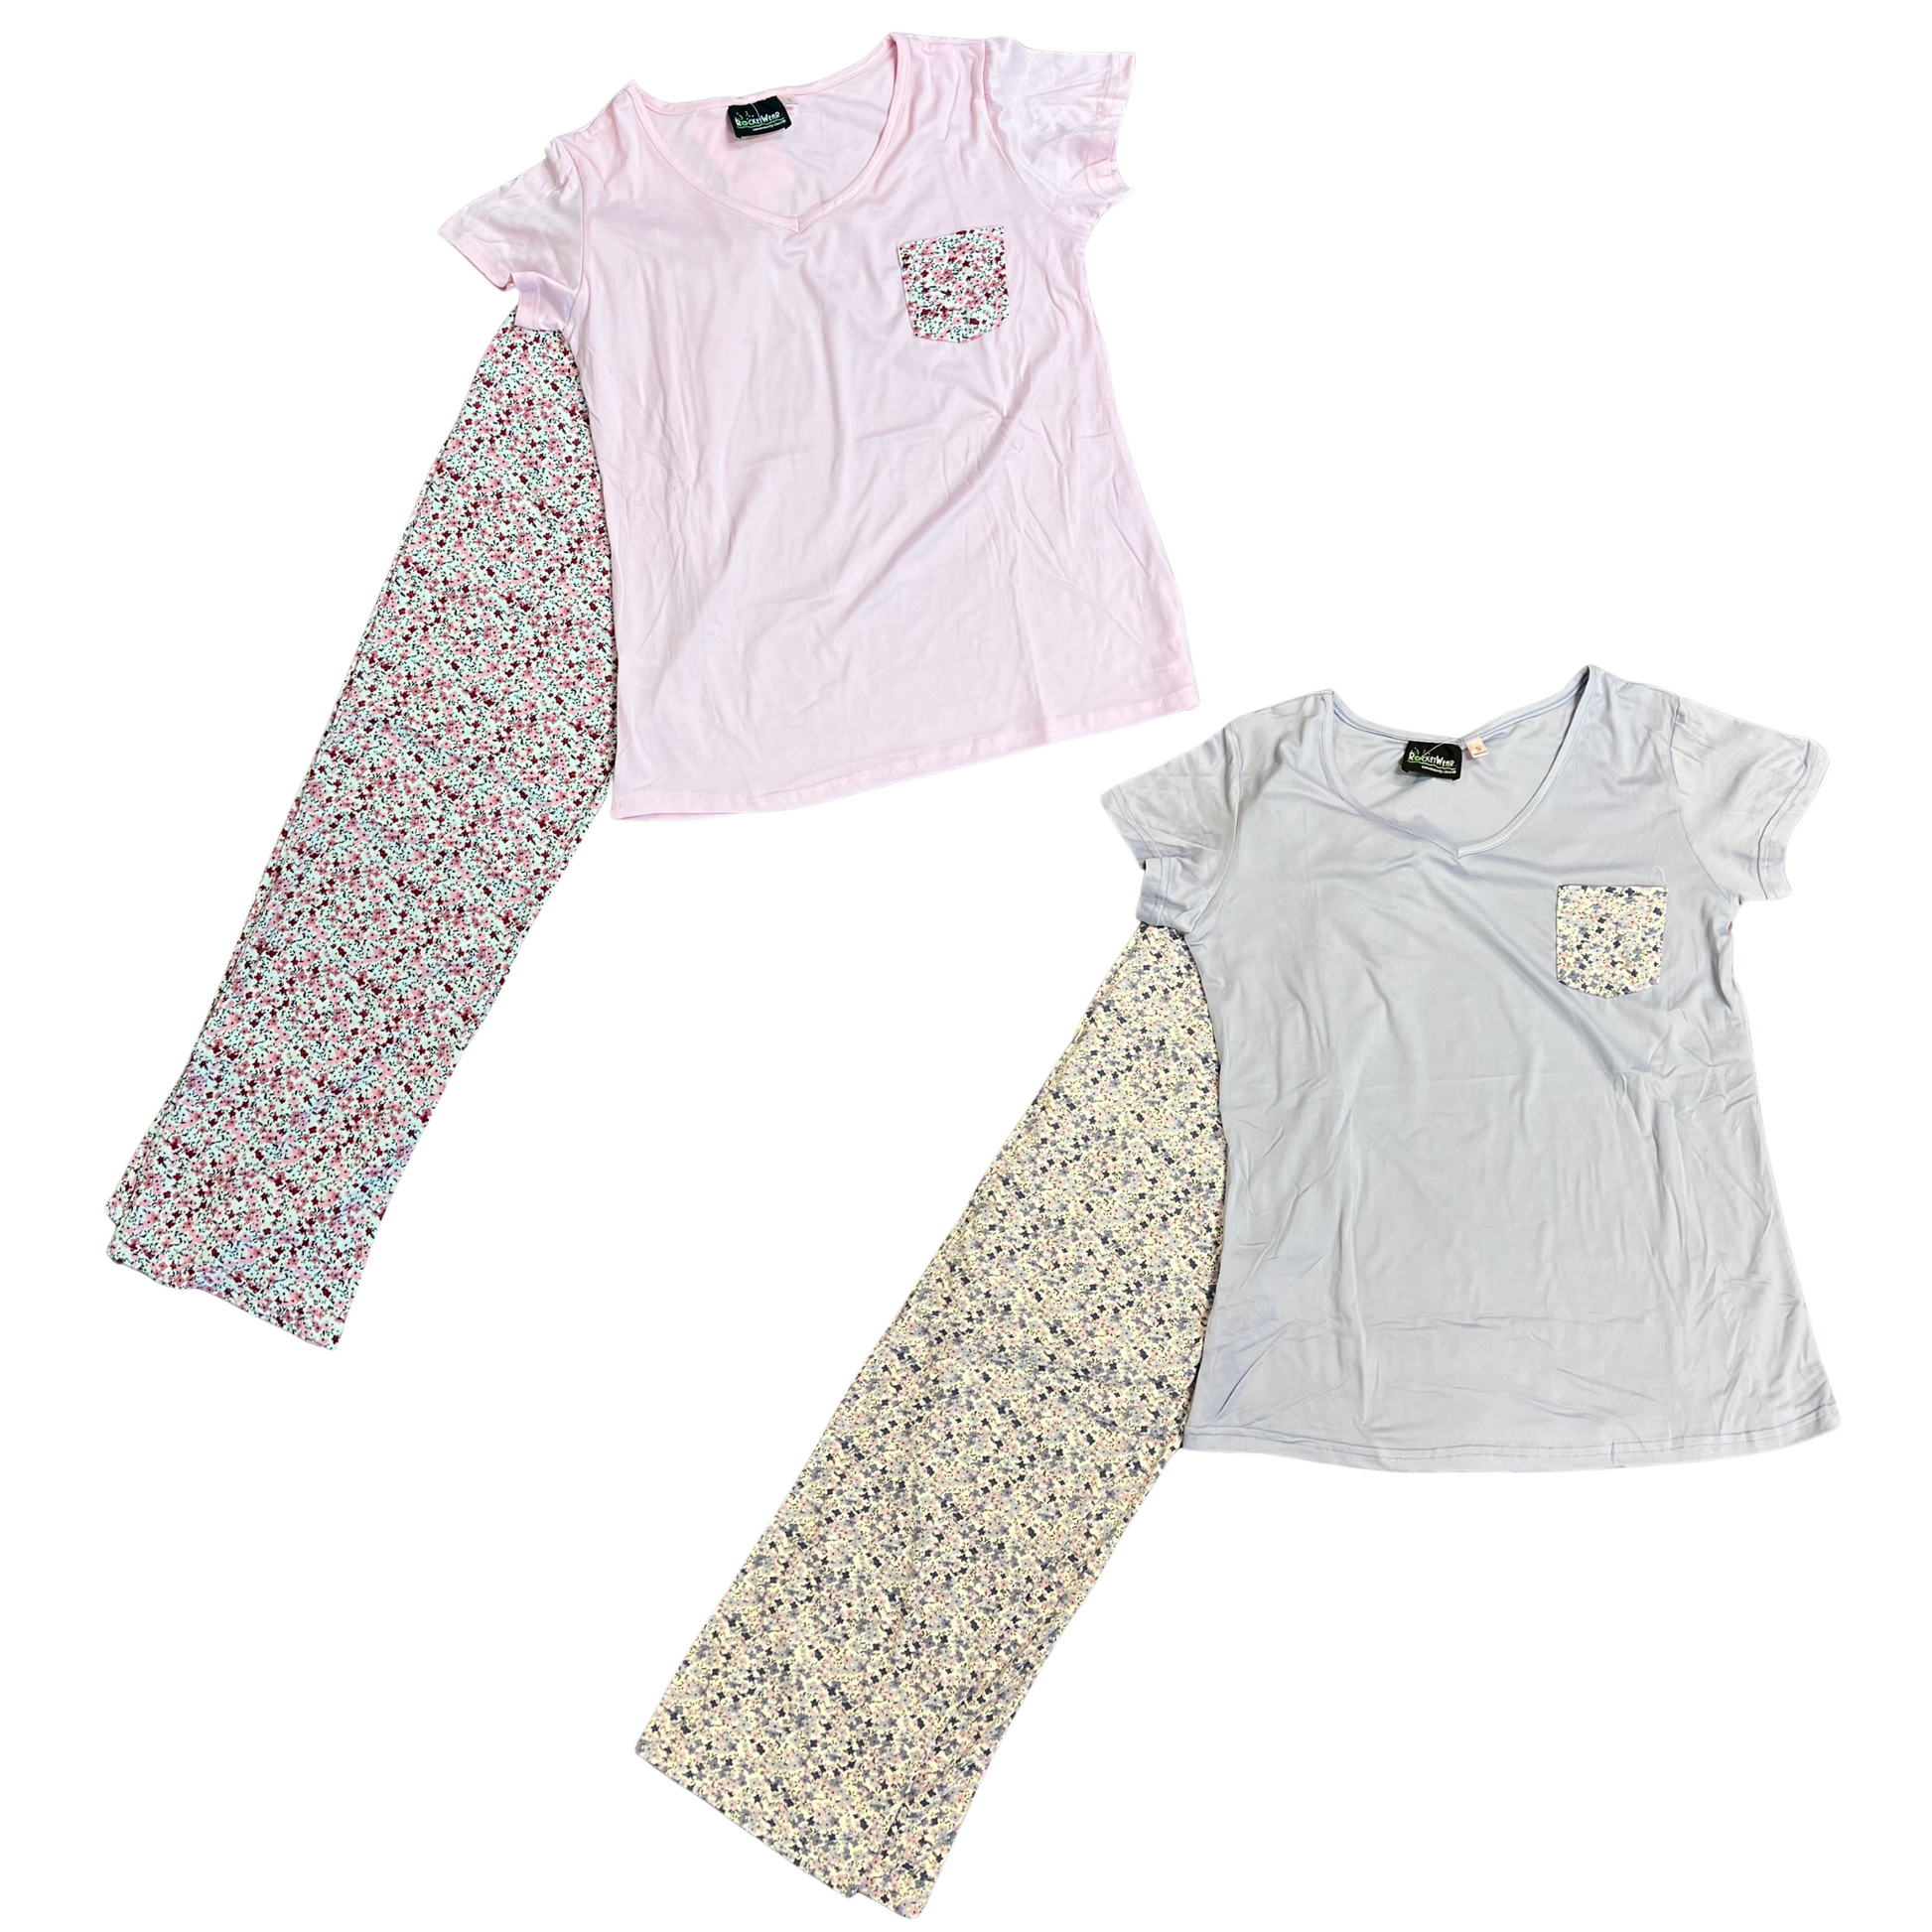 This loungewear set is crafted from butter soft fabric for unparalleled comfort and style. Available in blue and pink, the floral pattern adds a unique touch that's sure to brighten up your wardrobe.